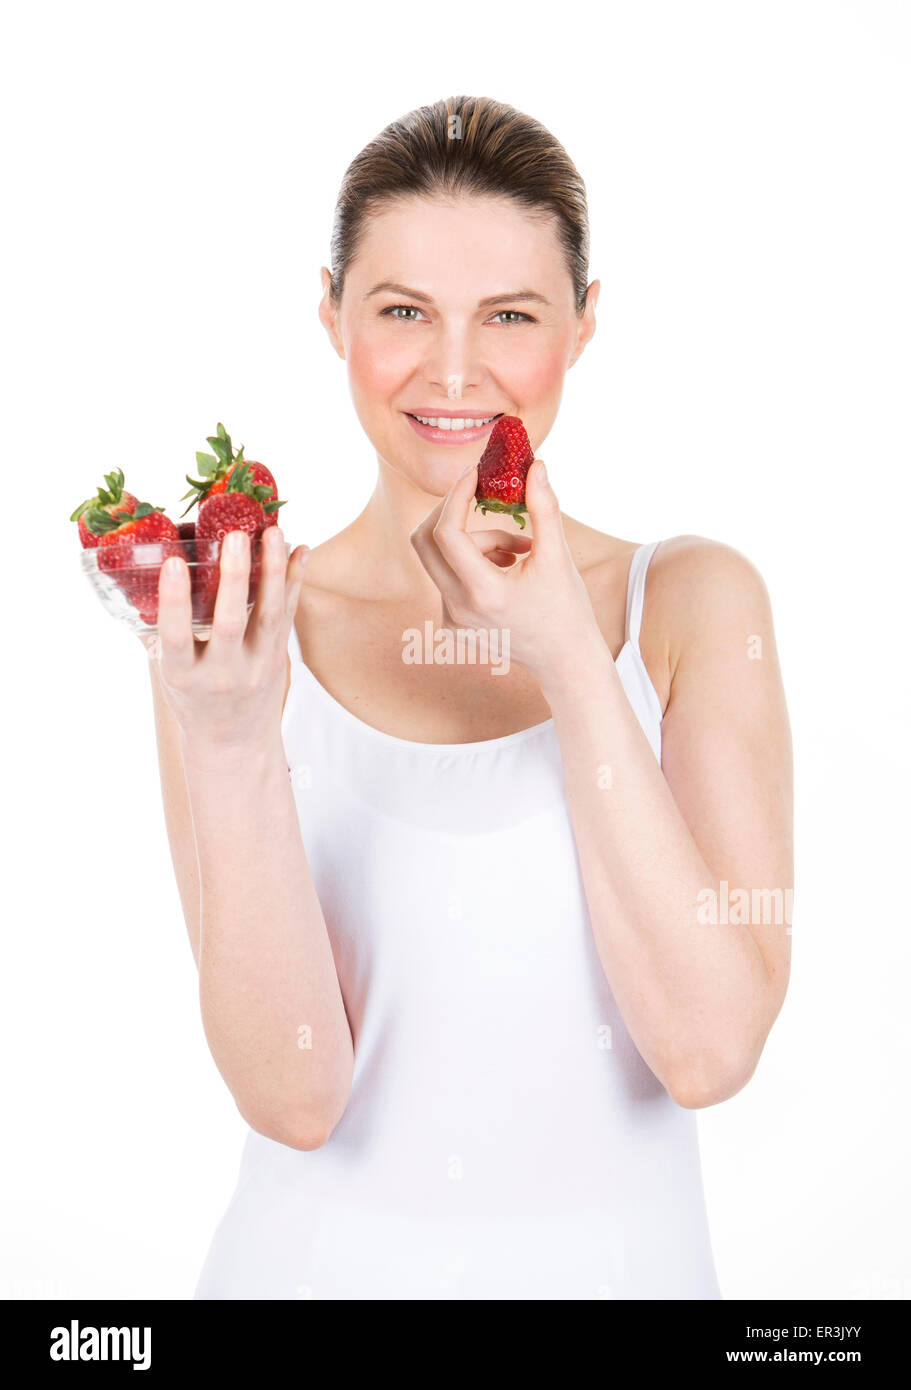 woman with white dress holding some strawberries Stock Photo